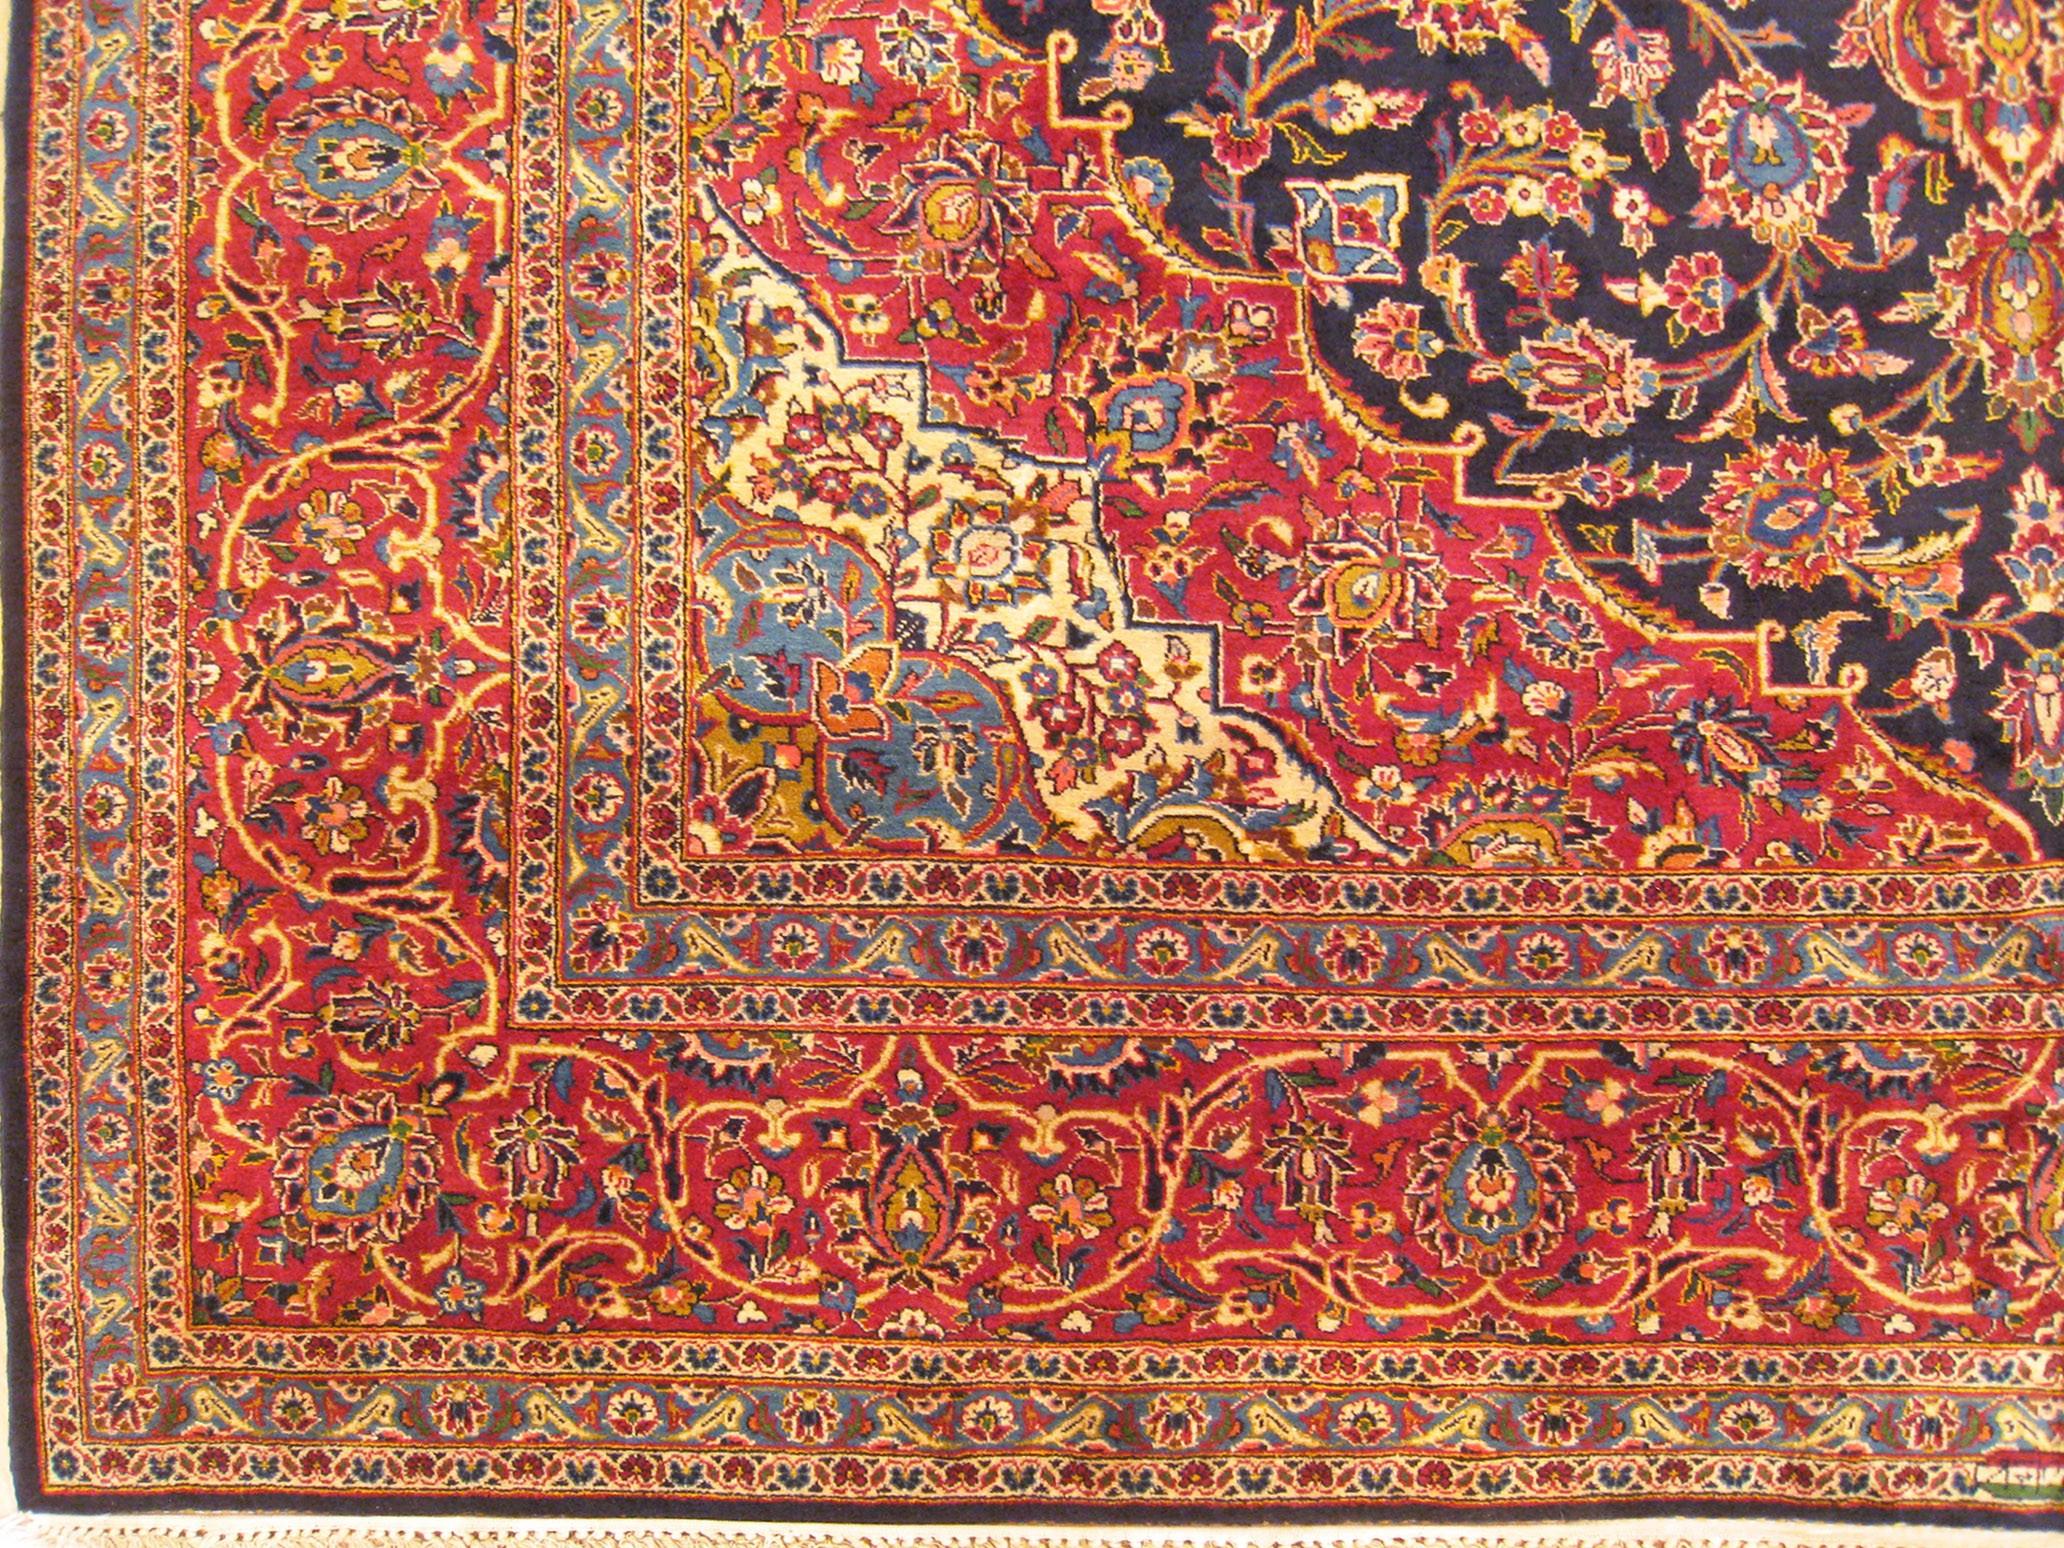 Hand-Knotted Vintage Persian Kashan Oriental Carpet, in Room size, with Central Medallion